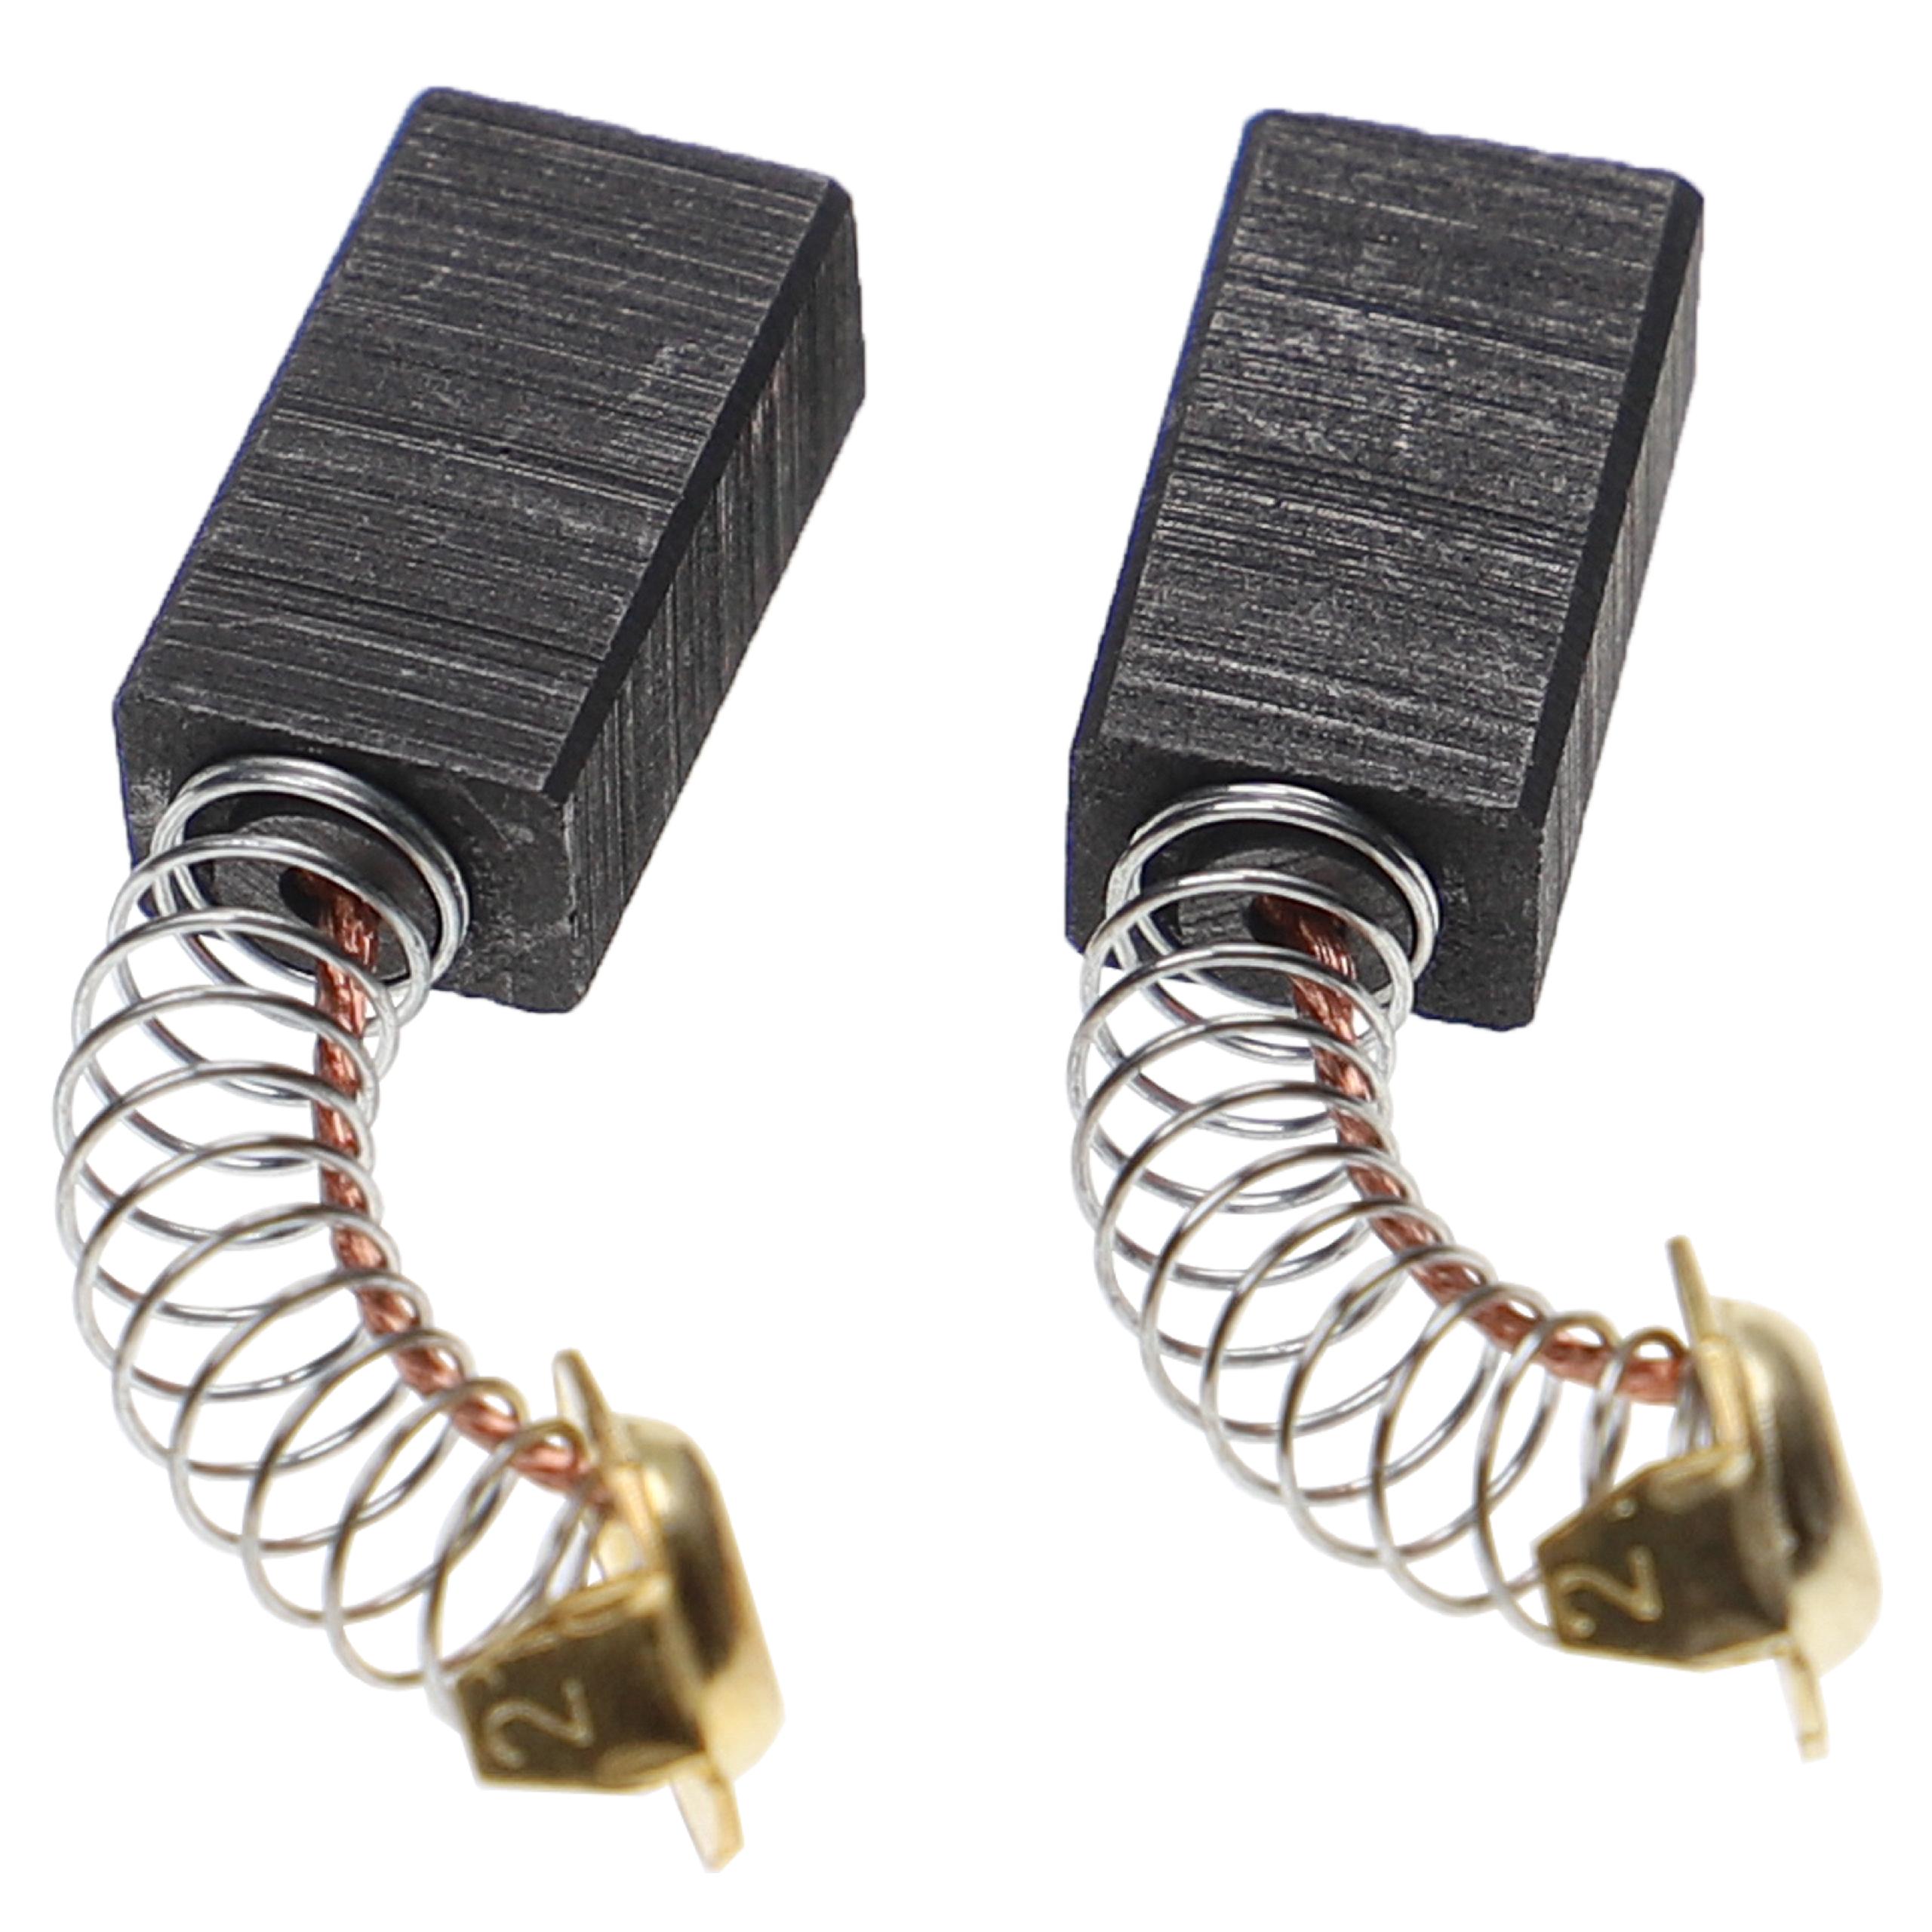 2x Carbon Brush as Replacement for Hitachi 999-088 Electric Power Tools + Spring, 6.55 x 9 x 17mm